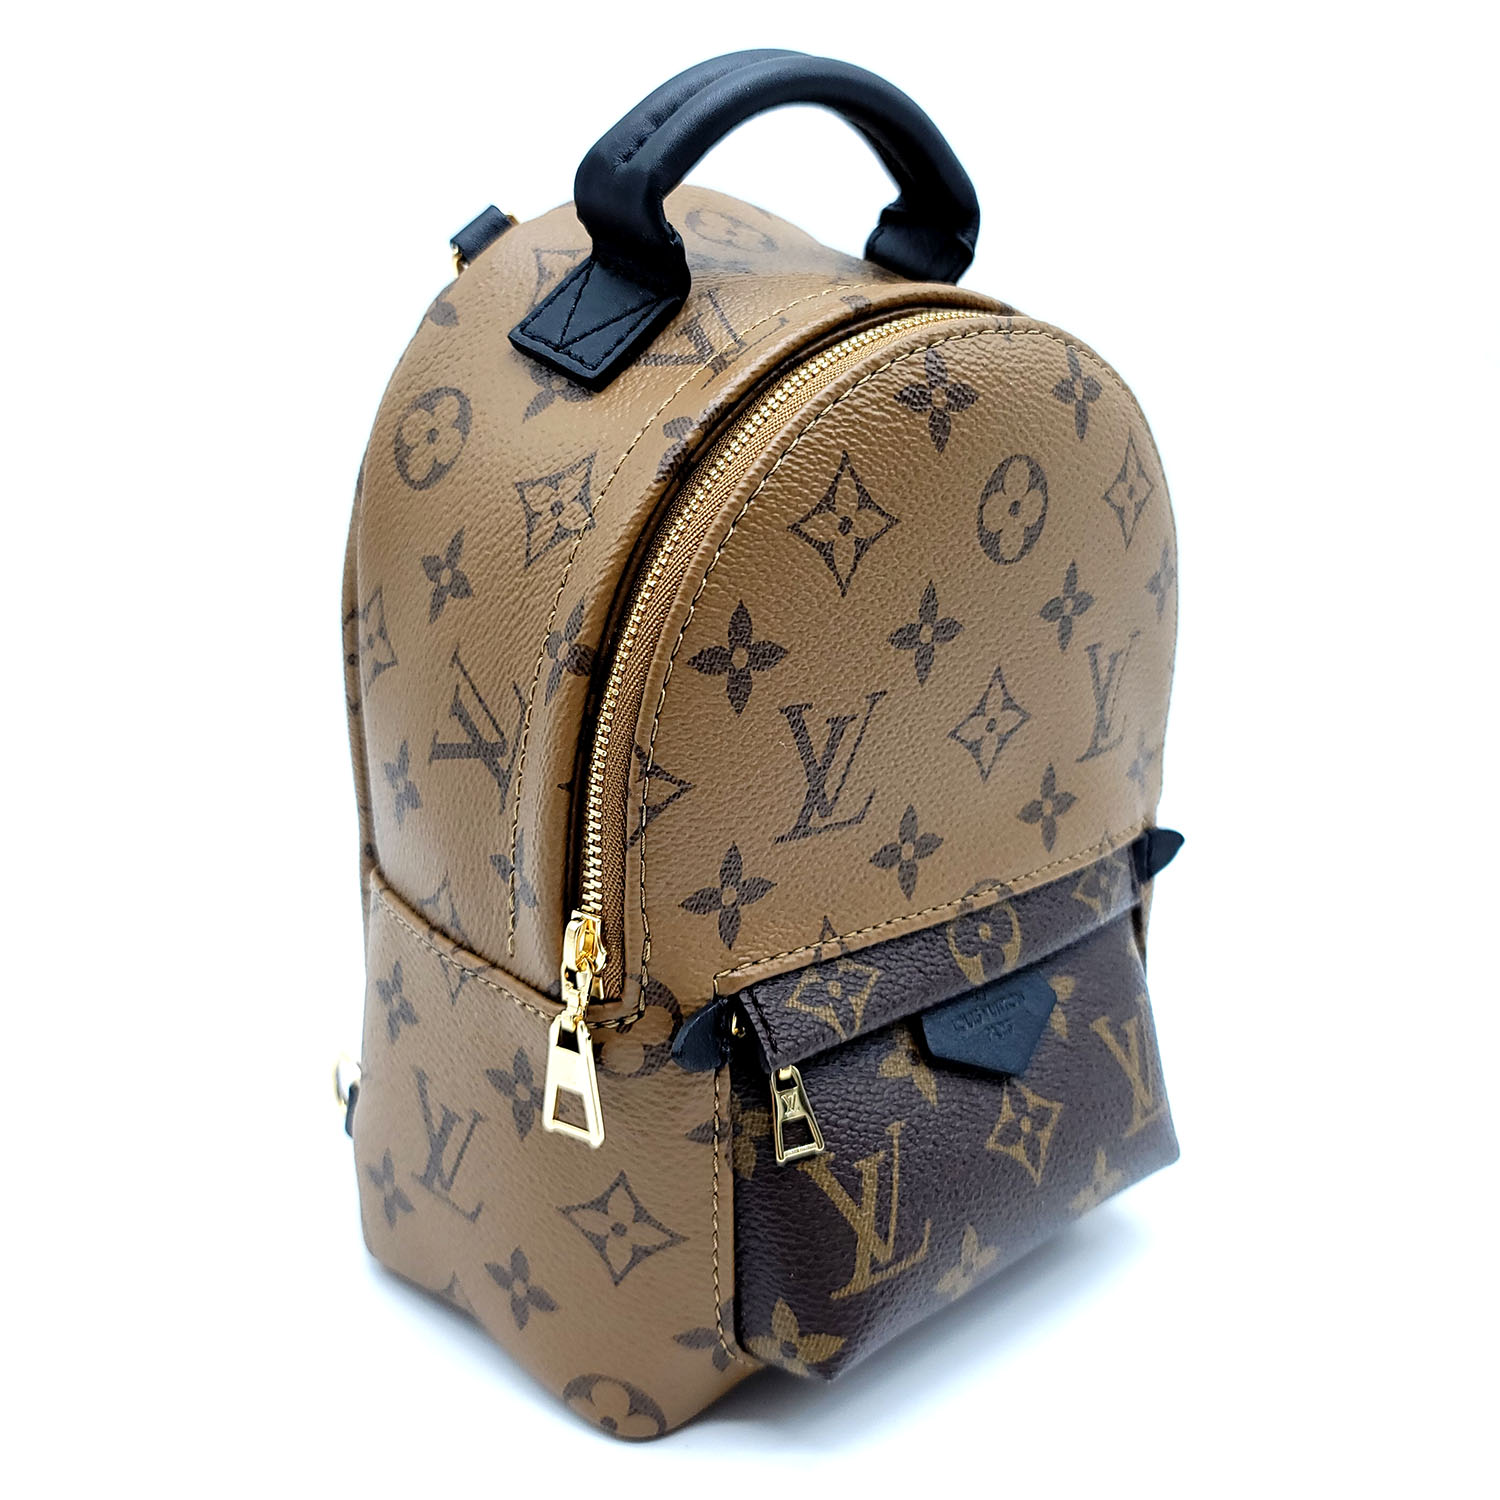 where to find date code on louis vuitton backpack